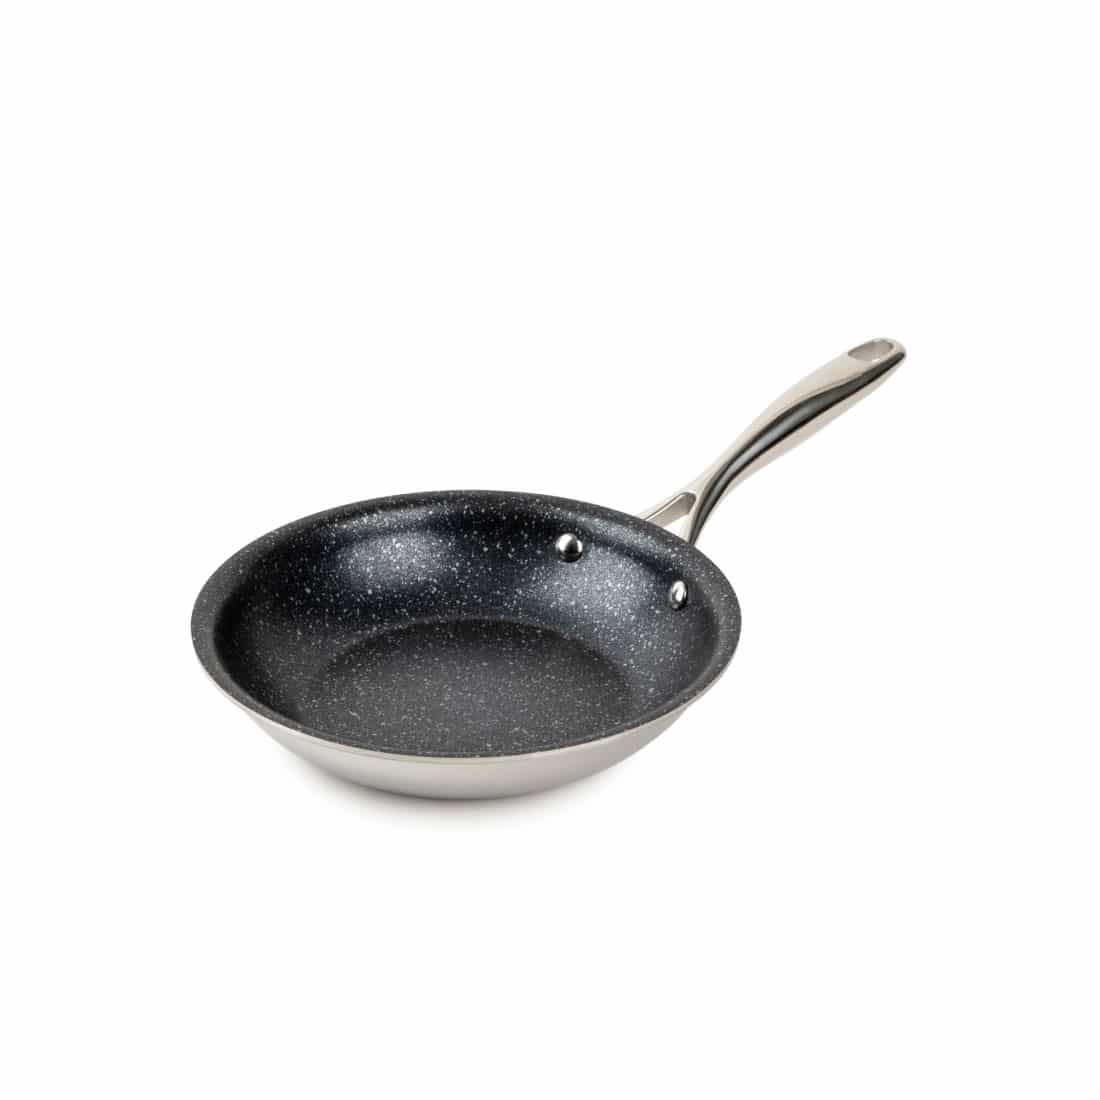 https://explorethymeandtable.com/wp-content/uploads/2021/02/triply-8in-frypan.jpg